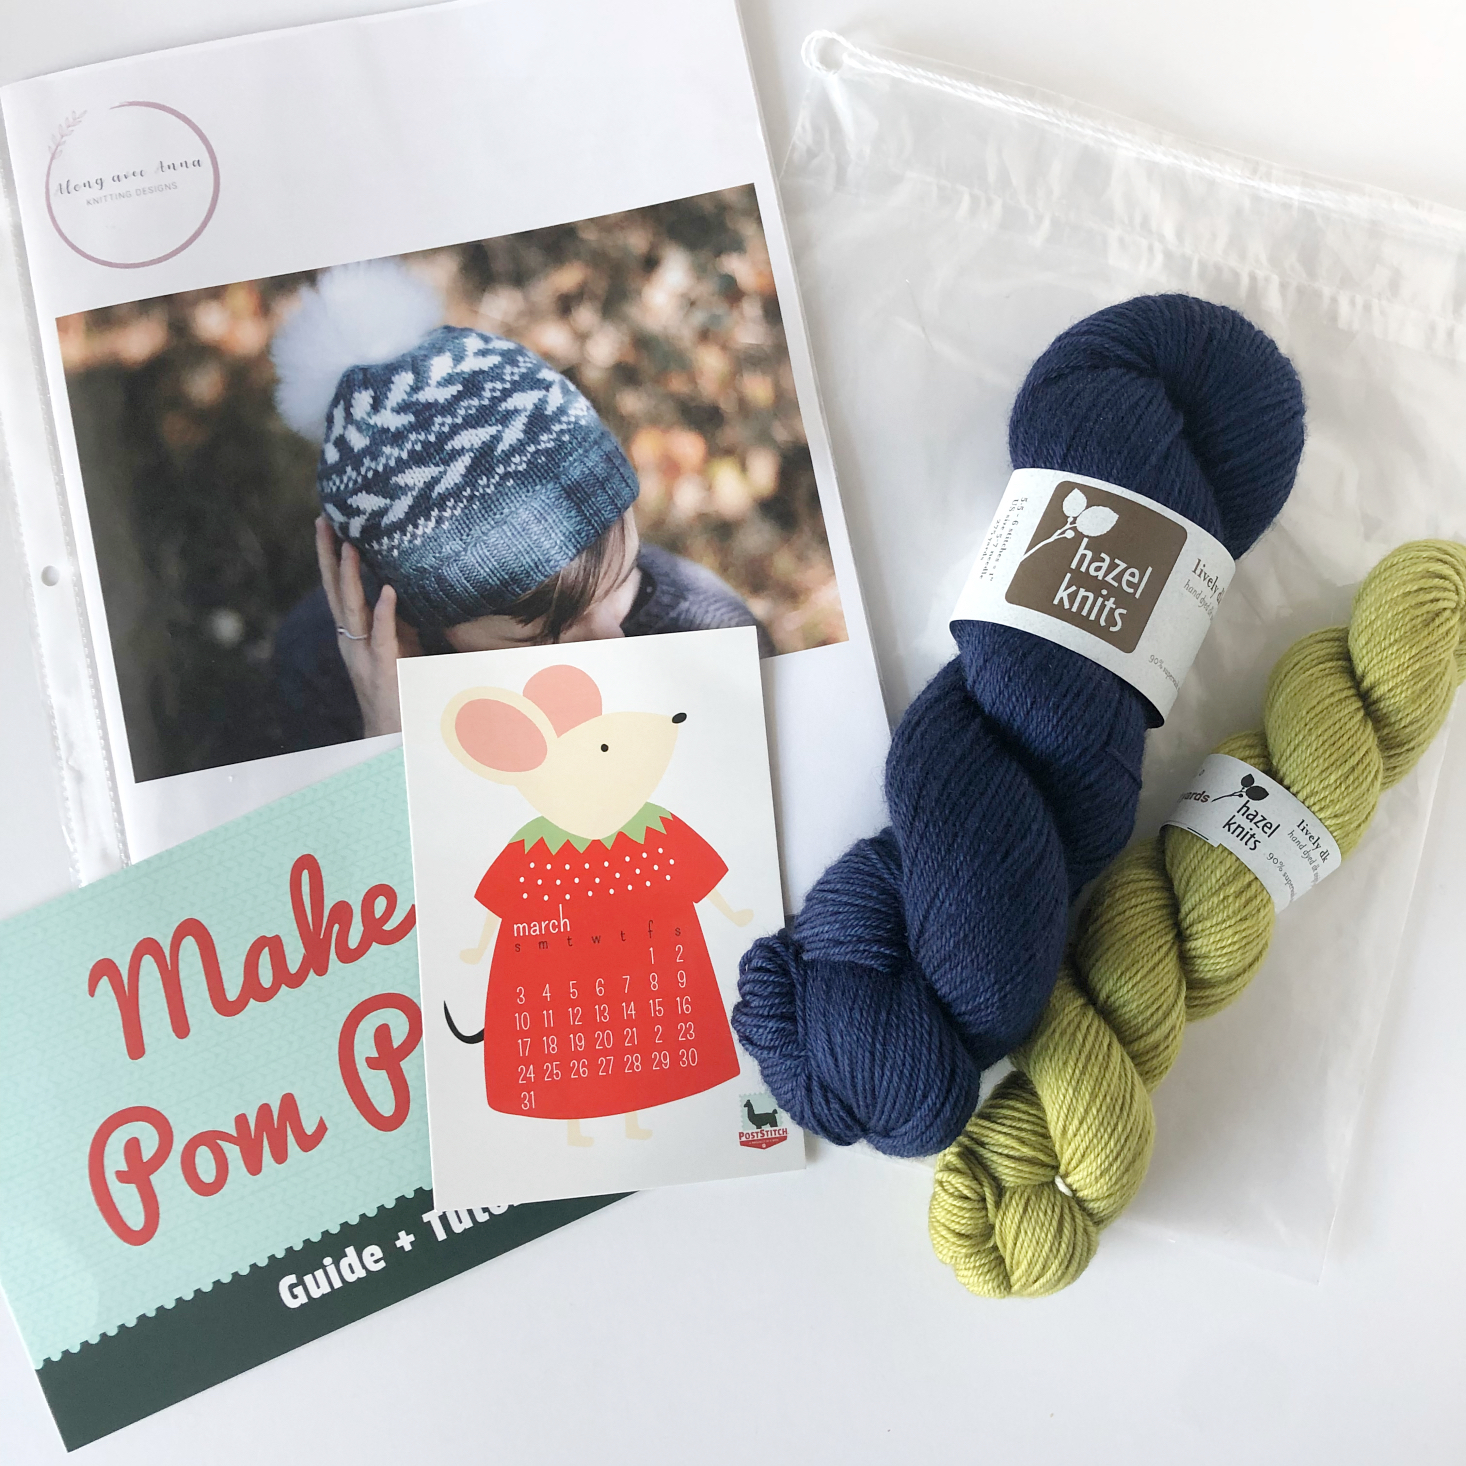 PostStitch Yarn Subscription Box Review – March 2019